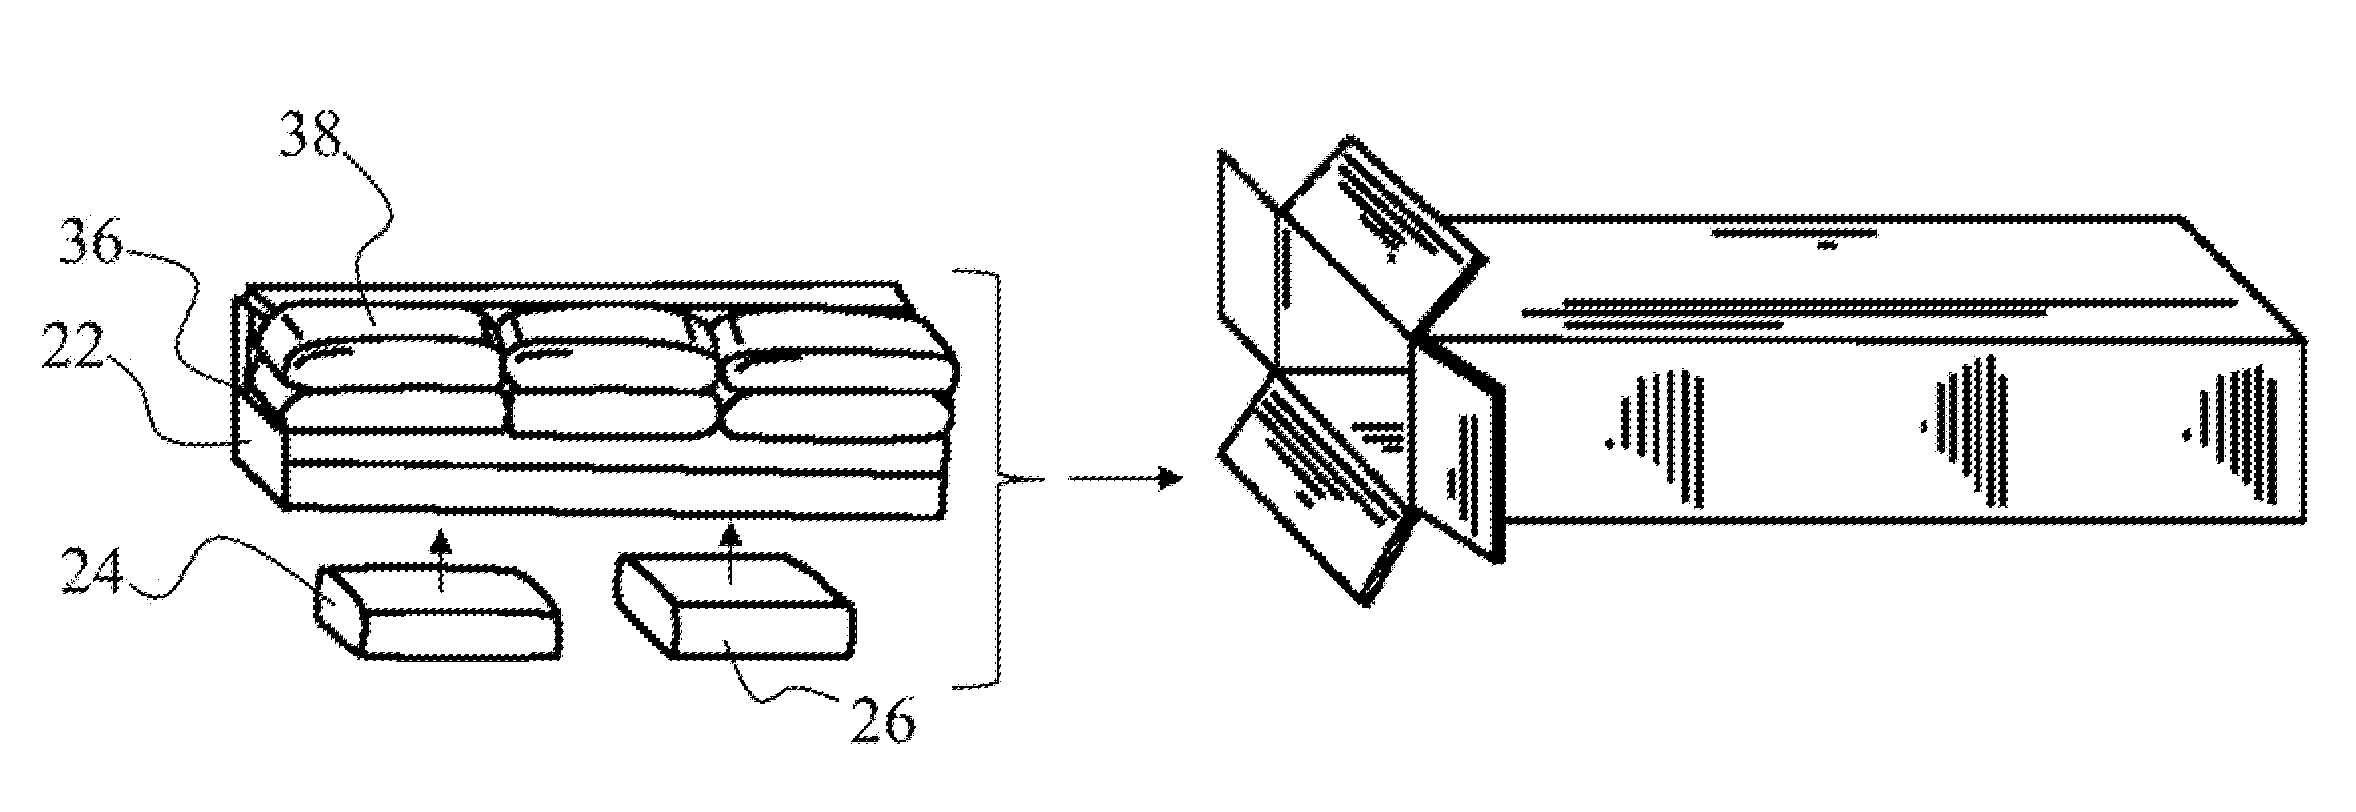 Sofa with shipping and use configuration